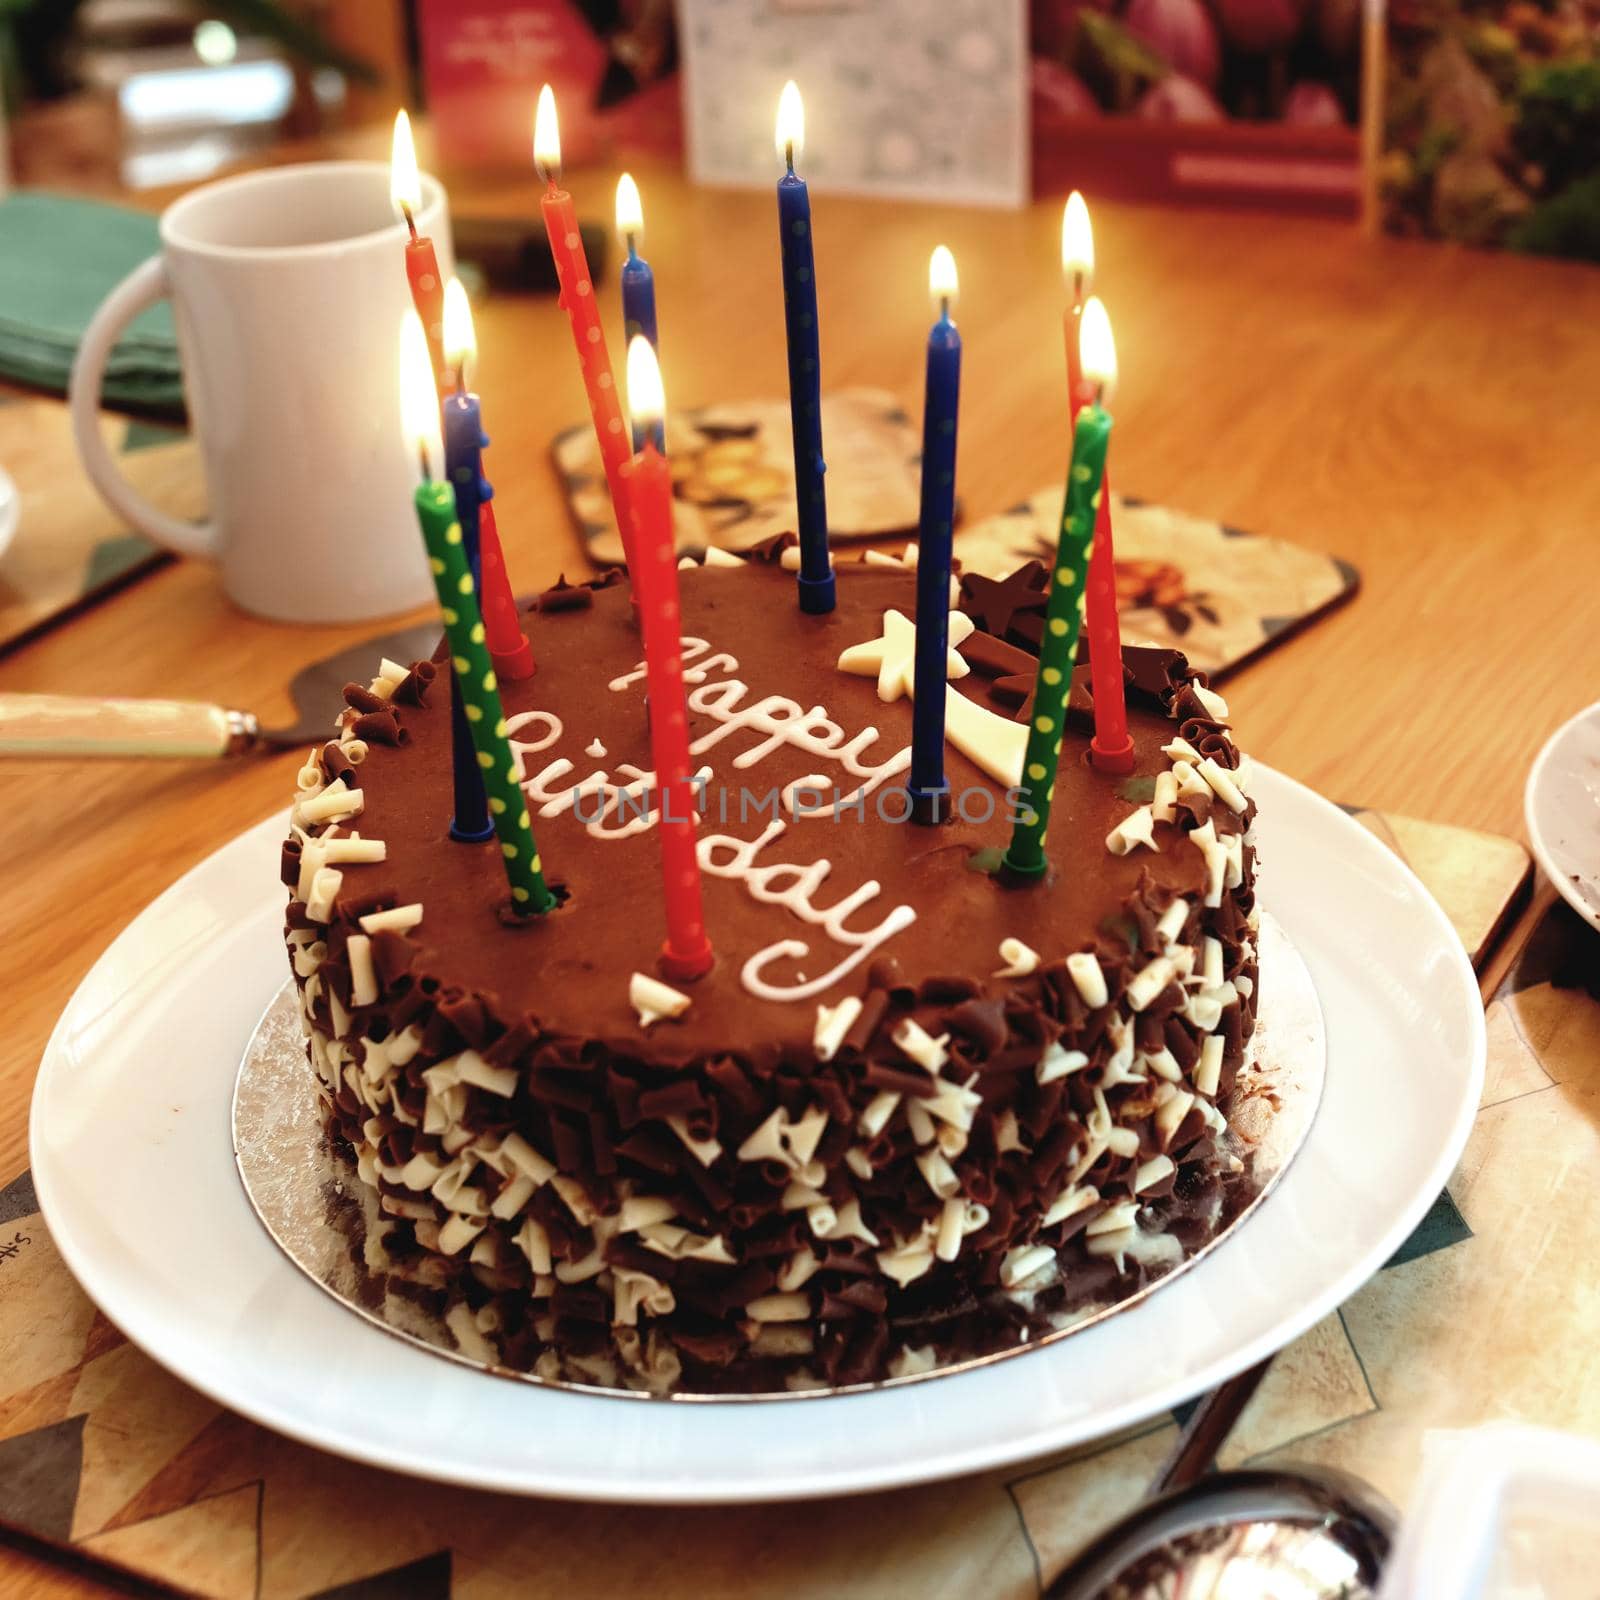 chocolate birthday cake with candles